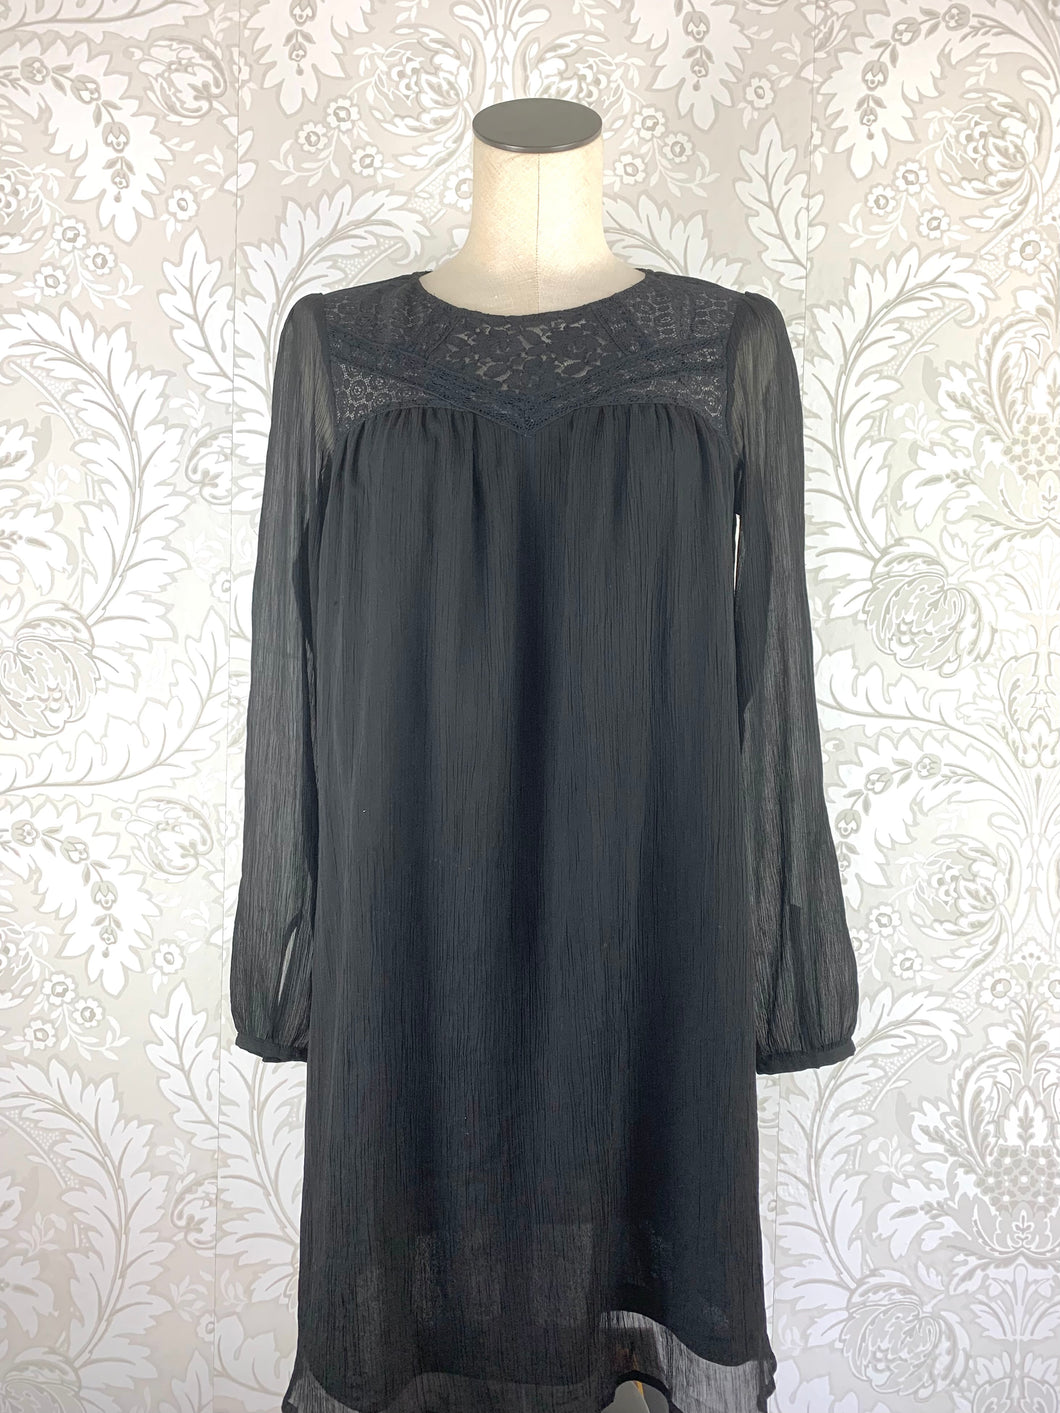 H&M Sheer Babydoll Dress W/Embroidery size 4